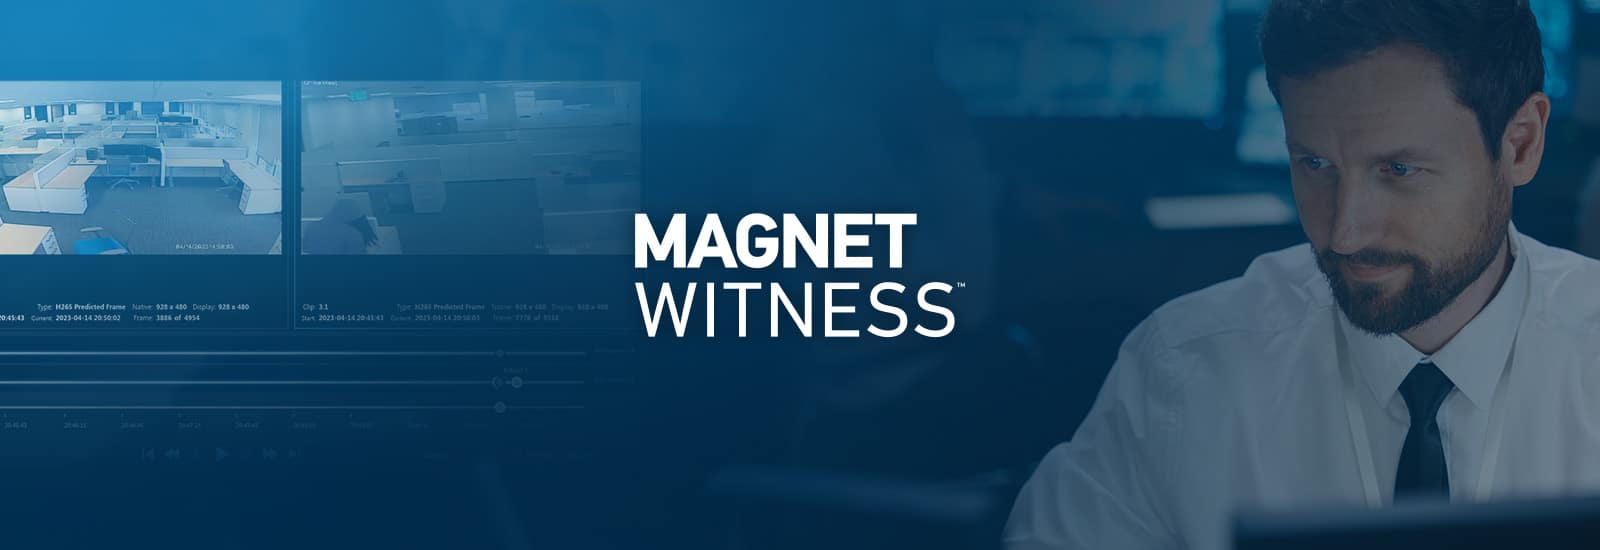 A decorative header for the Magnet WITNESS launch blog